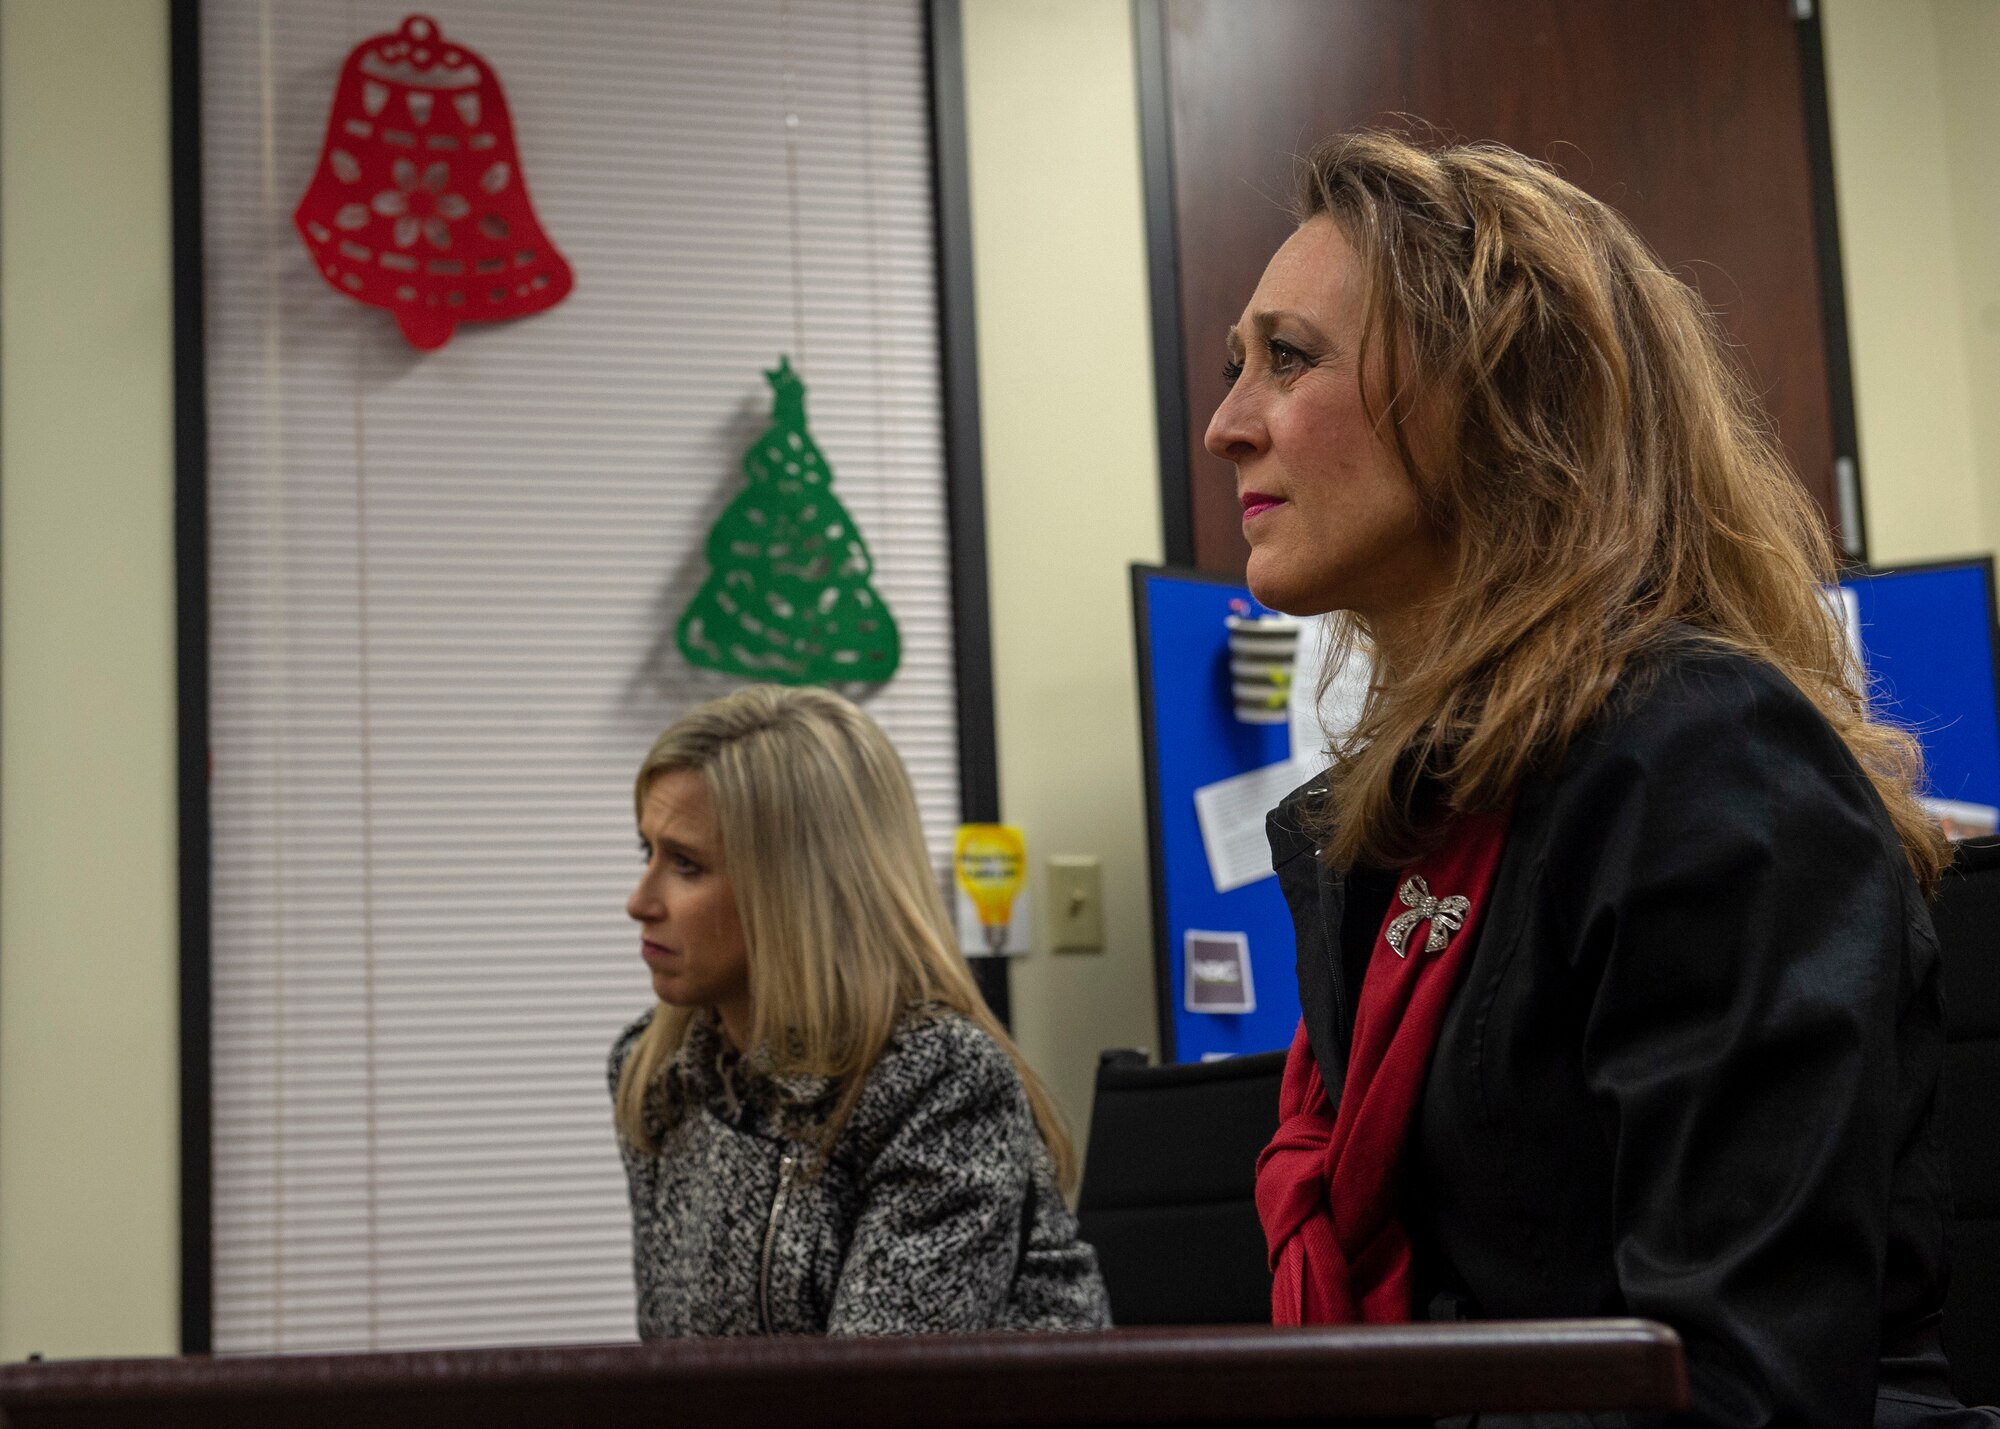 Joni Kwast, wife of U.S. Air Force Lt. Gen. Steven Kwast, commander of Air Education and Training Command, sits beside Tammy Carney, wife of Col. Eric Carney, 97th Air Mobility Wing commander, during an Airman and Family Readiness Center briefing, Dec. 18, 2018, at Altus Air Force Base, Okla. Kwast and Carney toured several locations on base that support the families of the Airmen. Kwast and her husband toured the base to learn more about how AETC can support Altus in future operations. (U.S. Air Force Photo by Senior Airman Jackson N. Haddon)